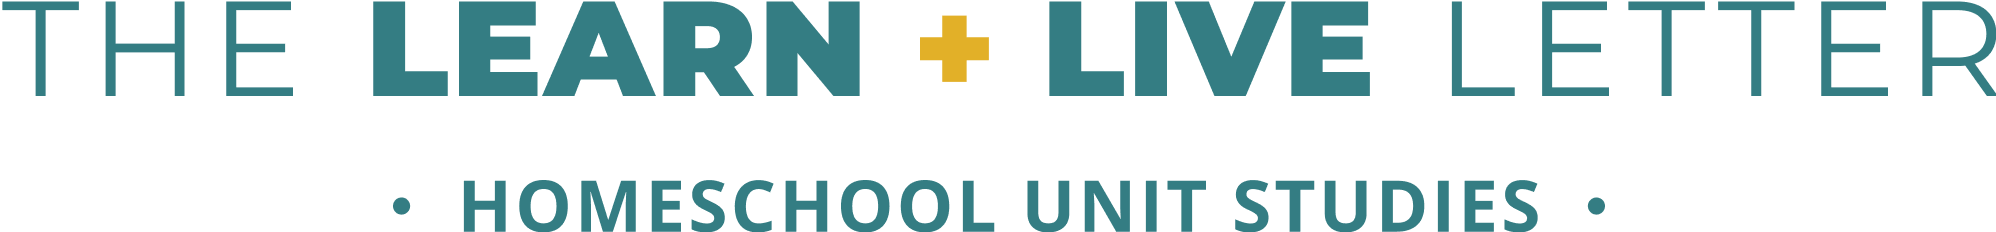 The Learn and Live Letter logo